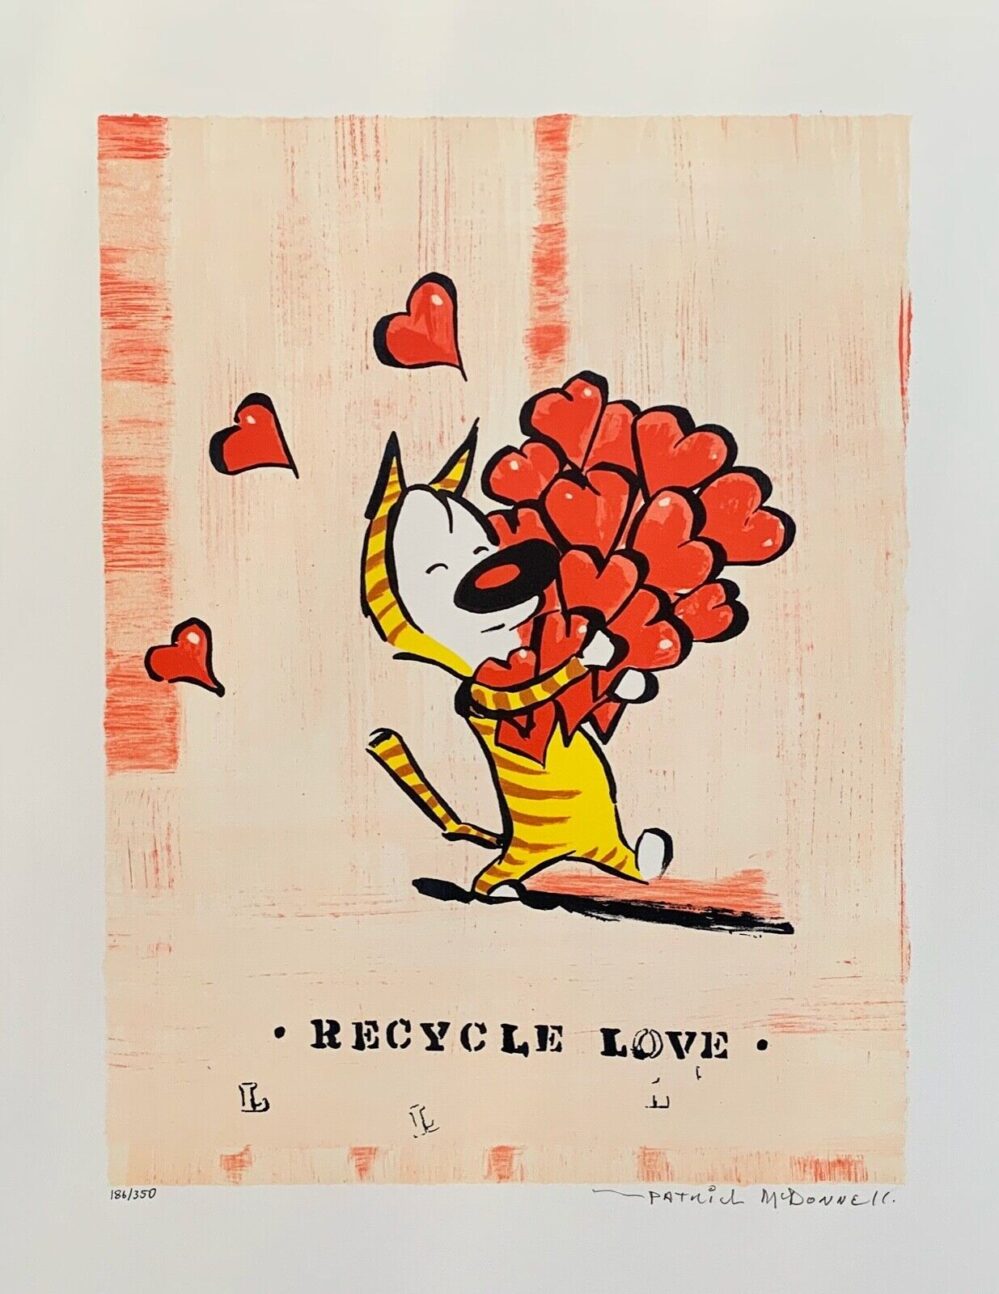 Patrick McDonnell RECYCLE LOVE Hand Signed Limited Edition Lithograph